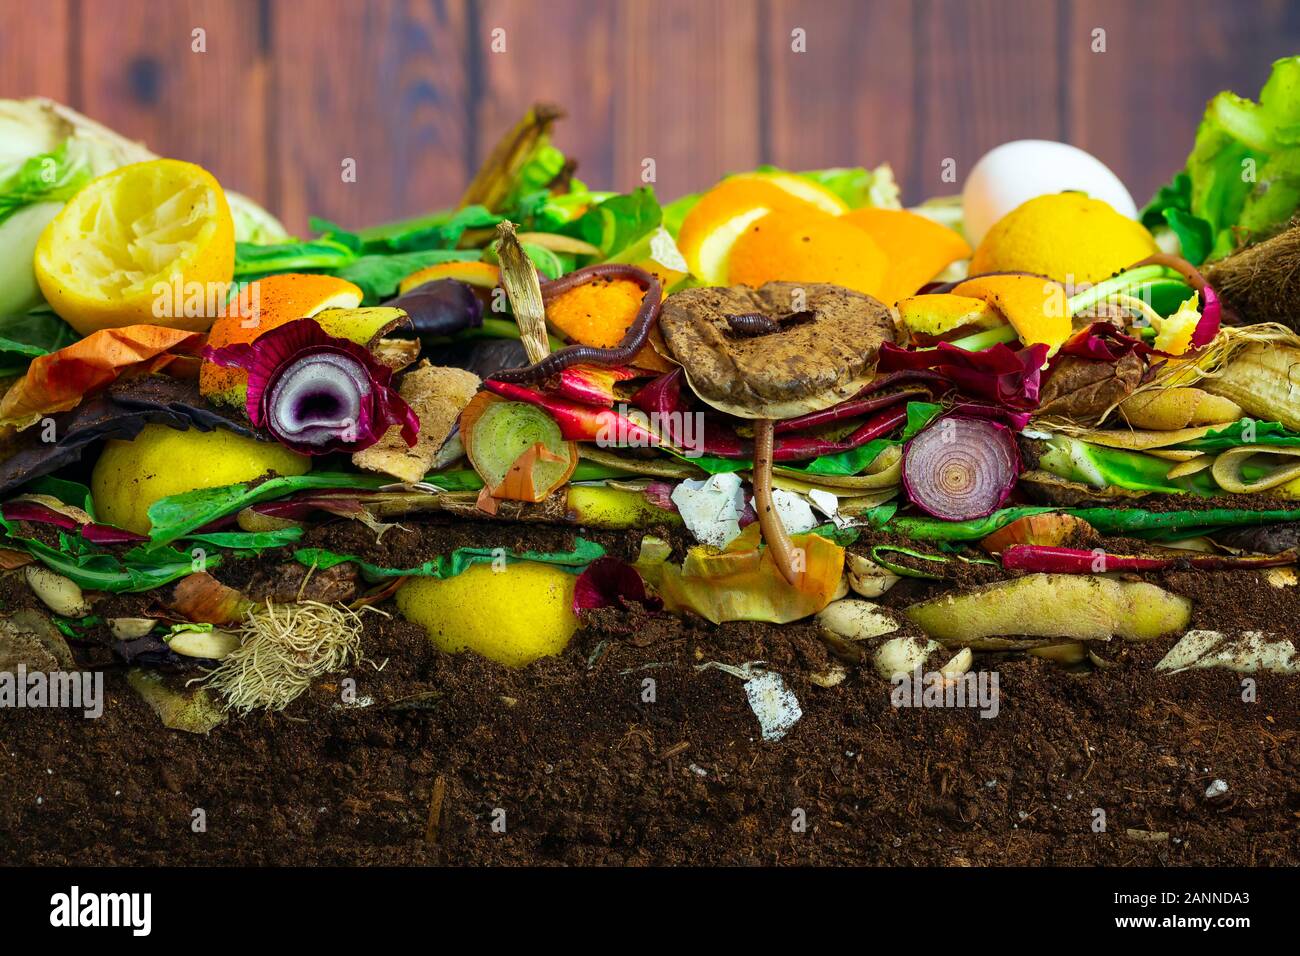 Earthwoms living in a colorful compost heap consisting of rotting kitchen leftovers Stock Photo